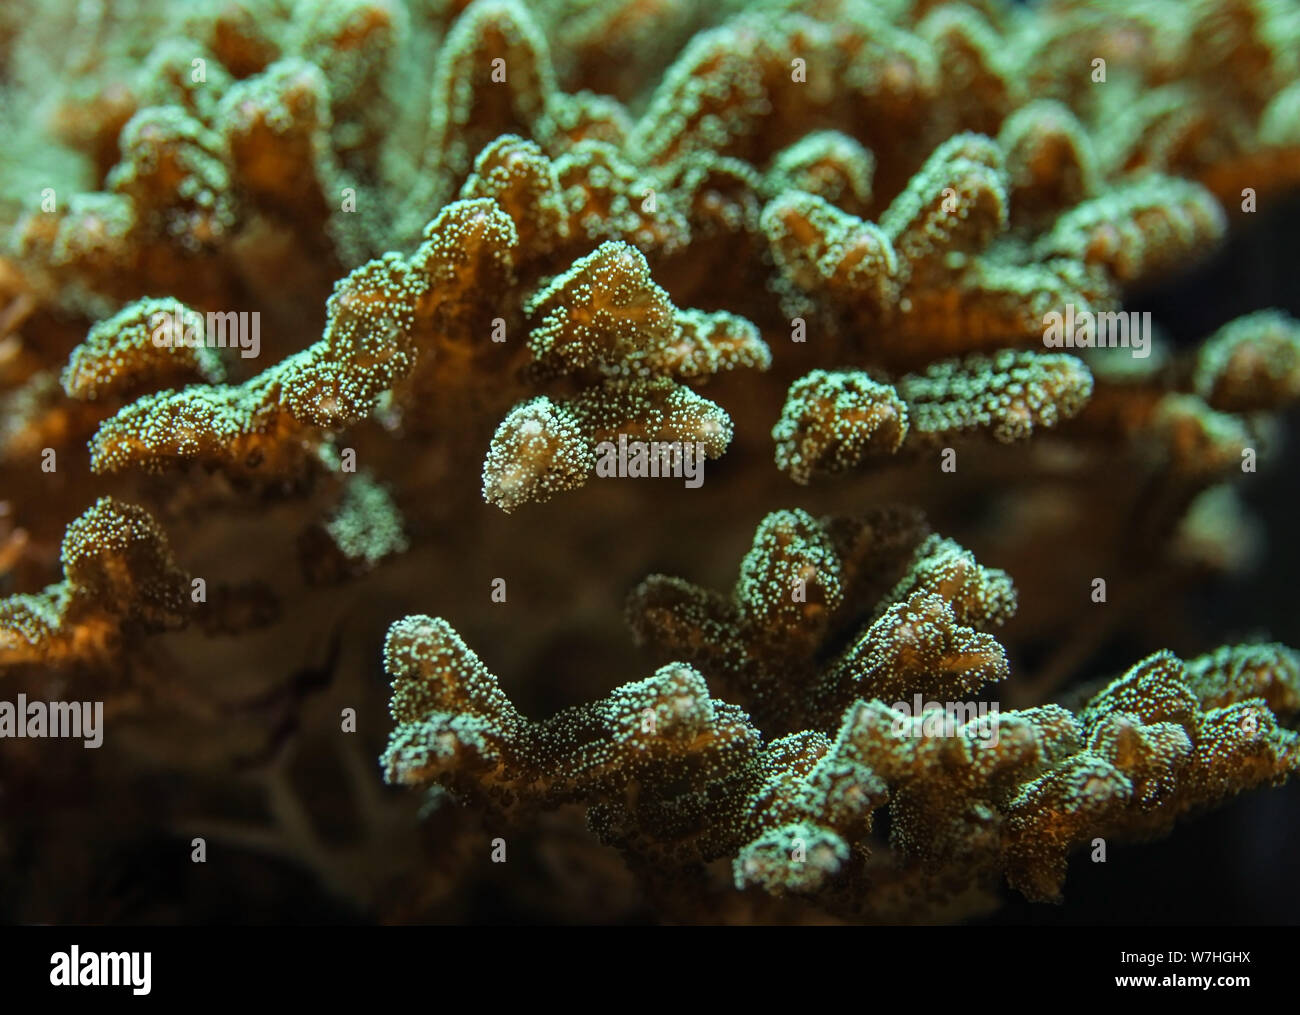 Underwater photo, close up of green blue coral emitting fluorescent light. Abstract marine background. Stock Photo